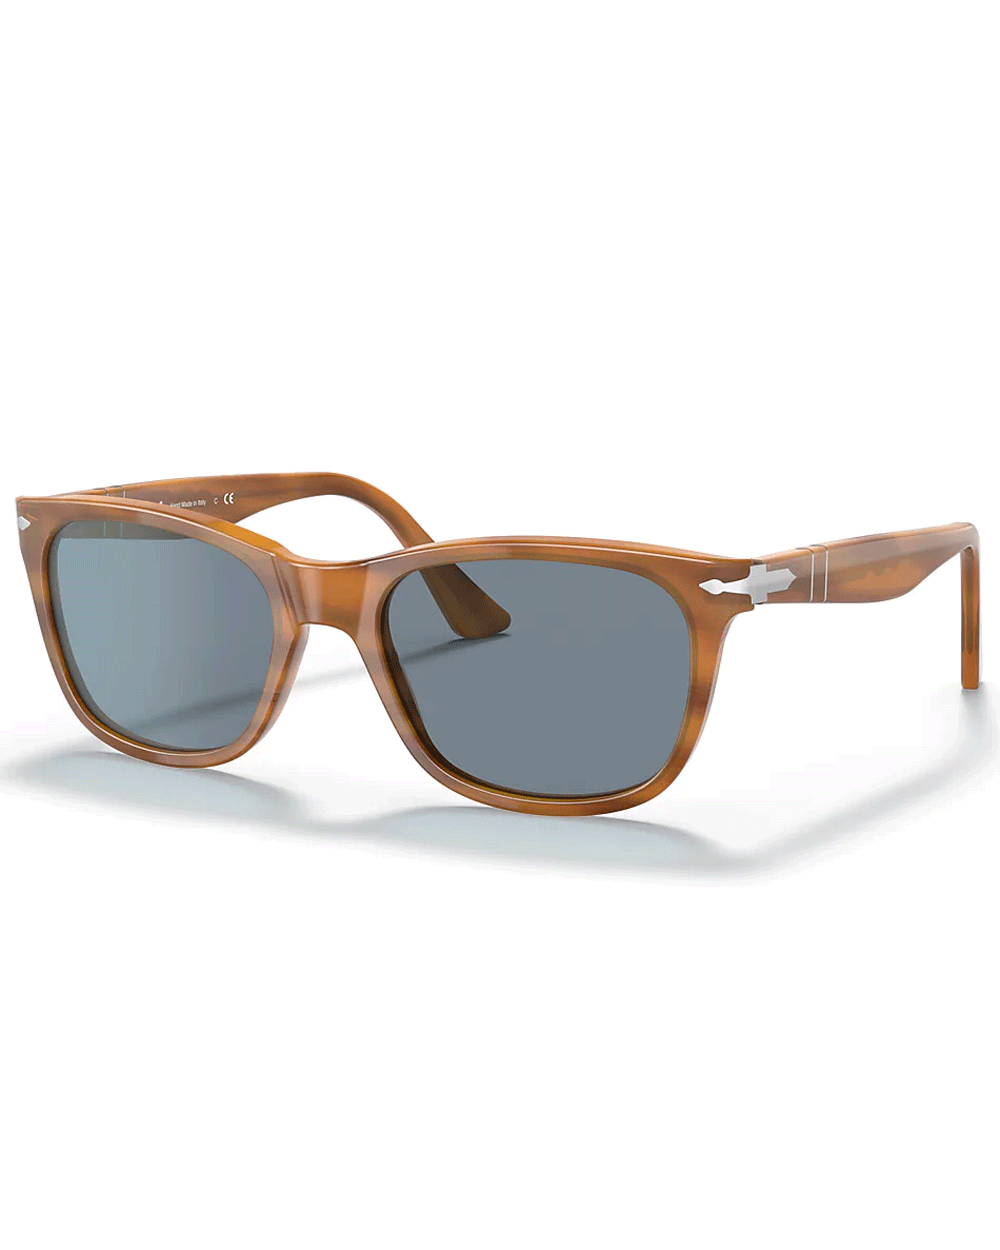 Striped Brown With Light Blue Lens Sunglasses